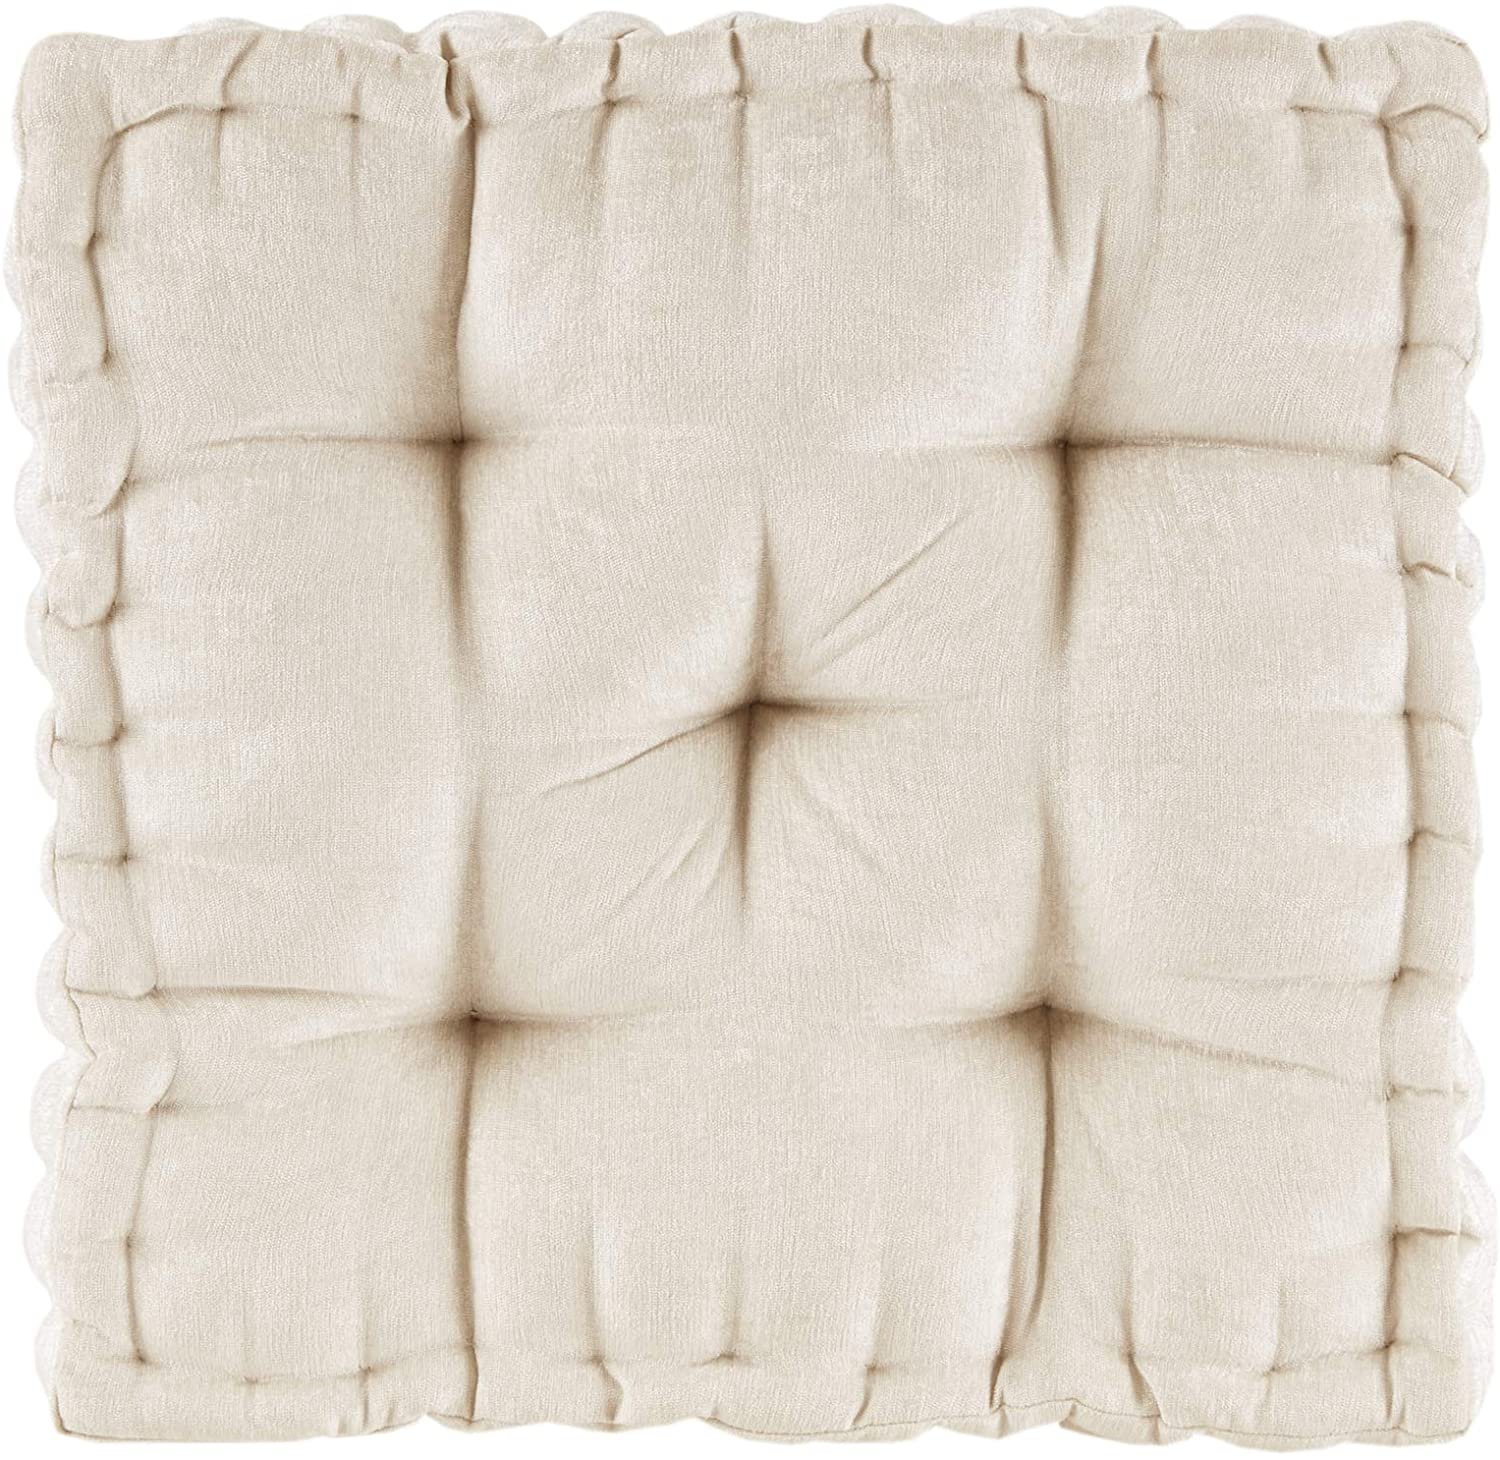 Ivory Square Pillow $5